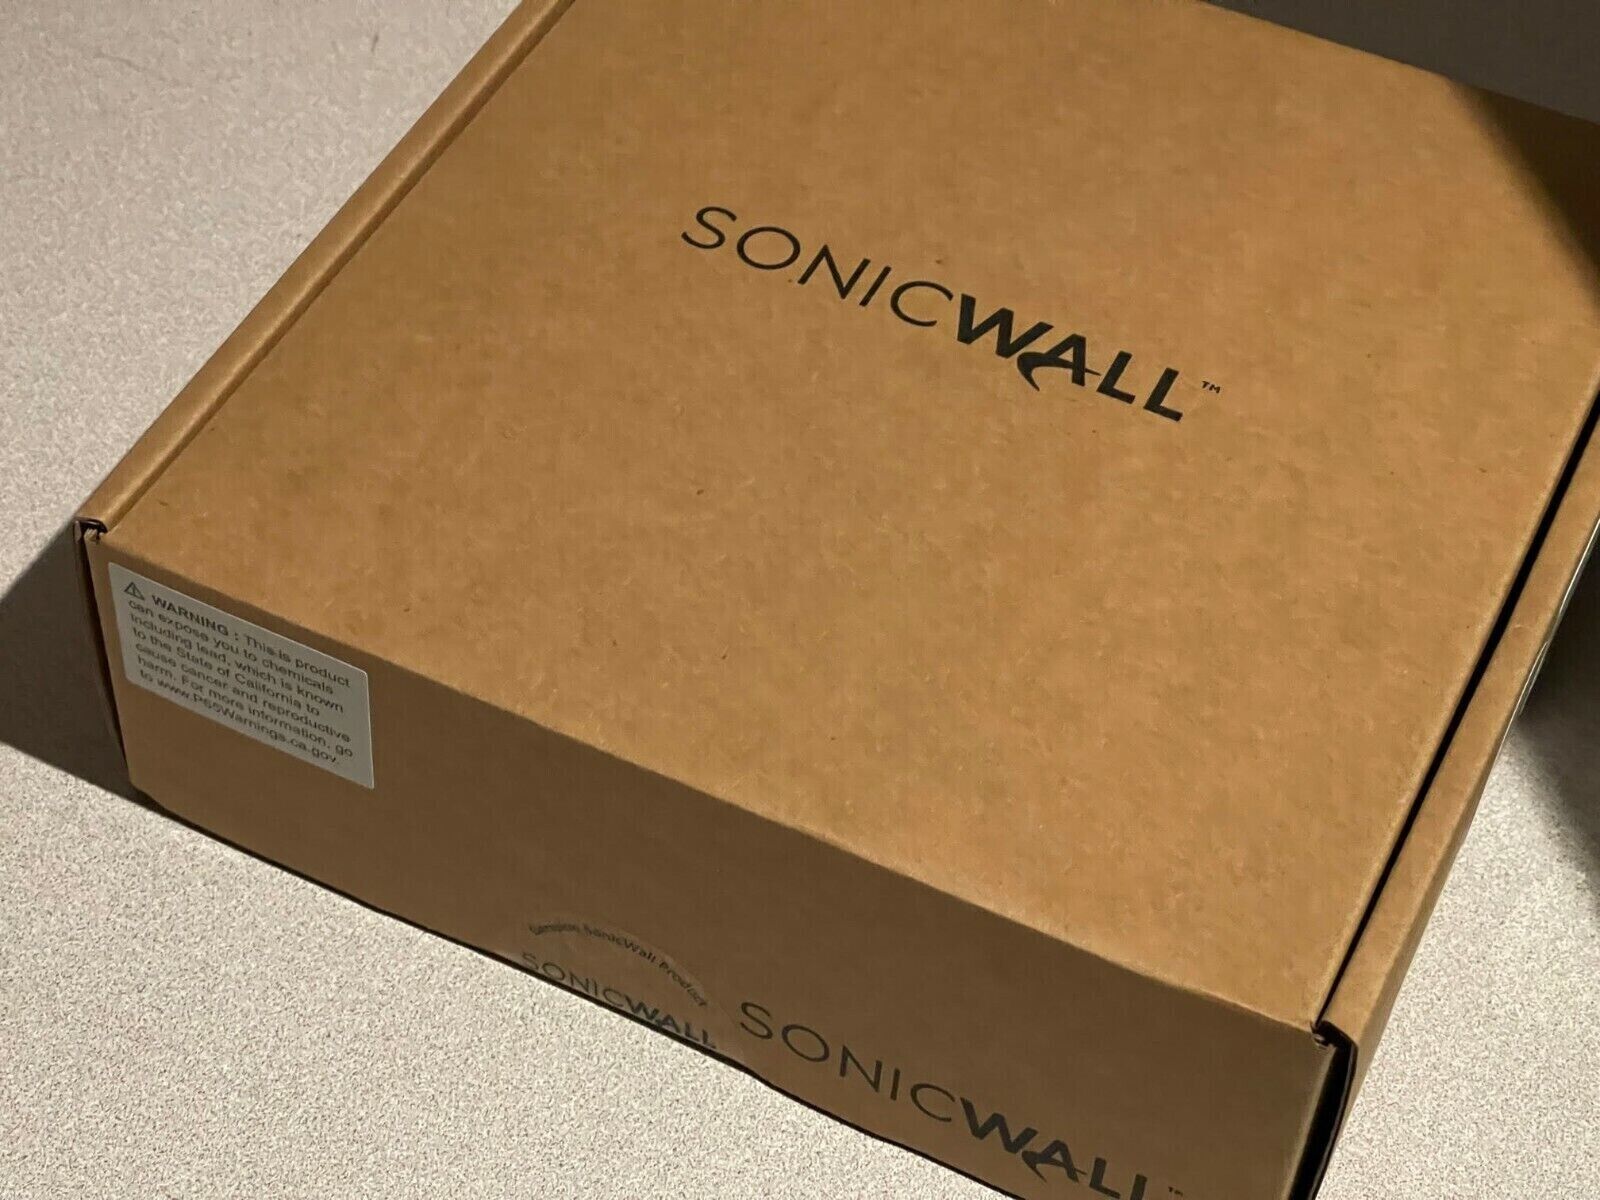 Sonicwall TZ400 Firewall | 3YR AGSS Promotional TradeUP | 01-SSC-3038 |FAST SHIP